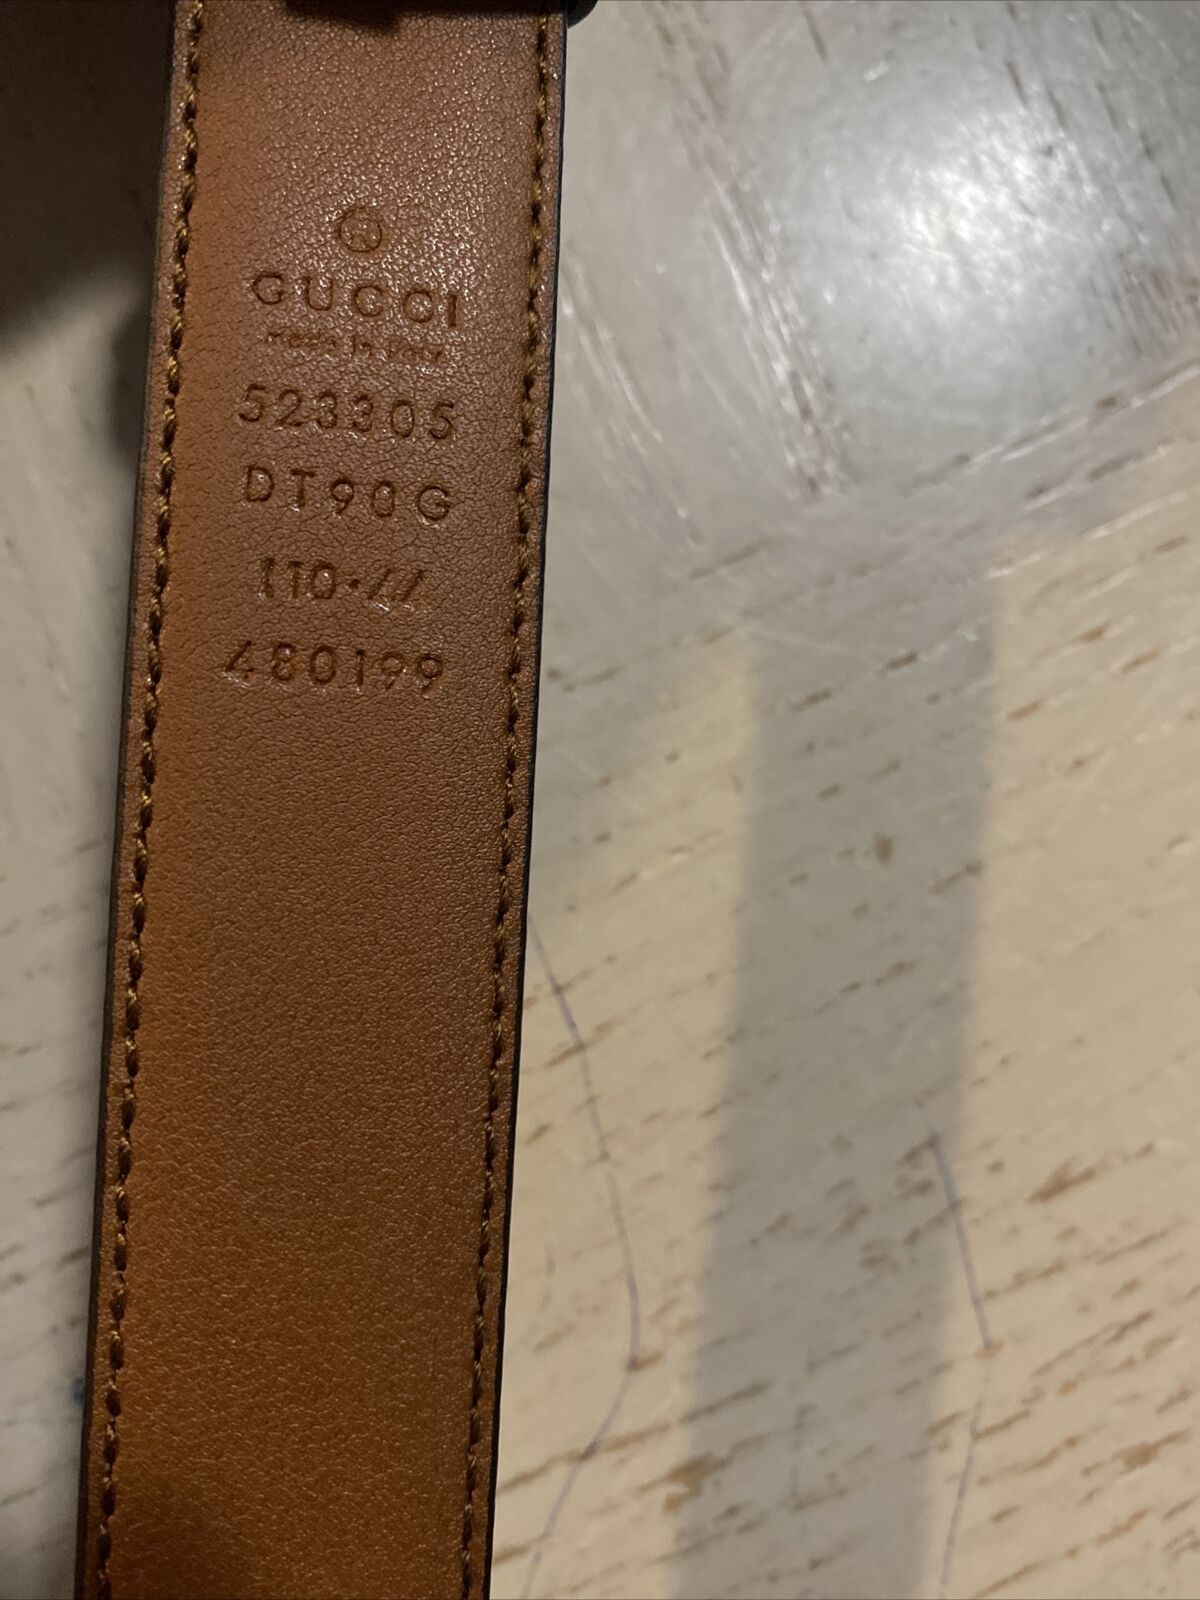 New $890 Gucci Mens Genuine Leather GG Belt Brown 110/44 Italy